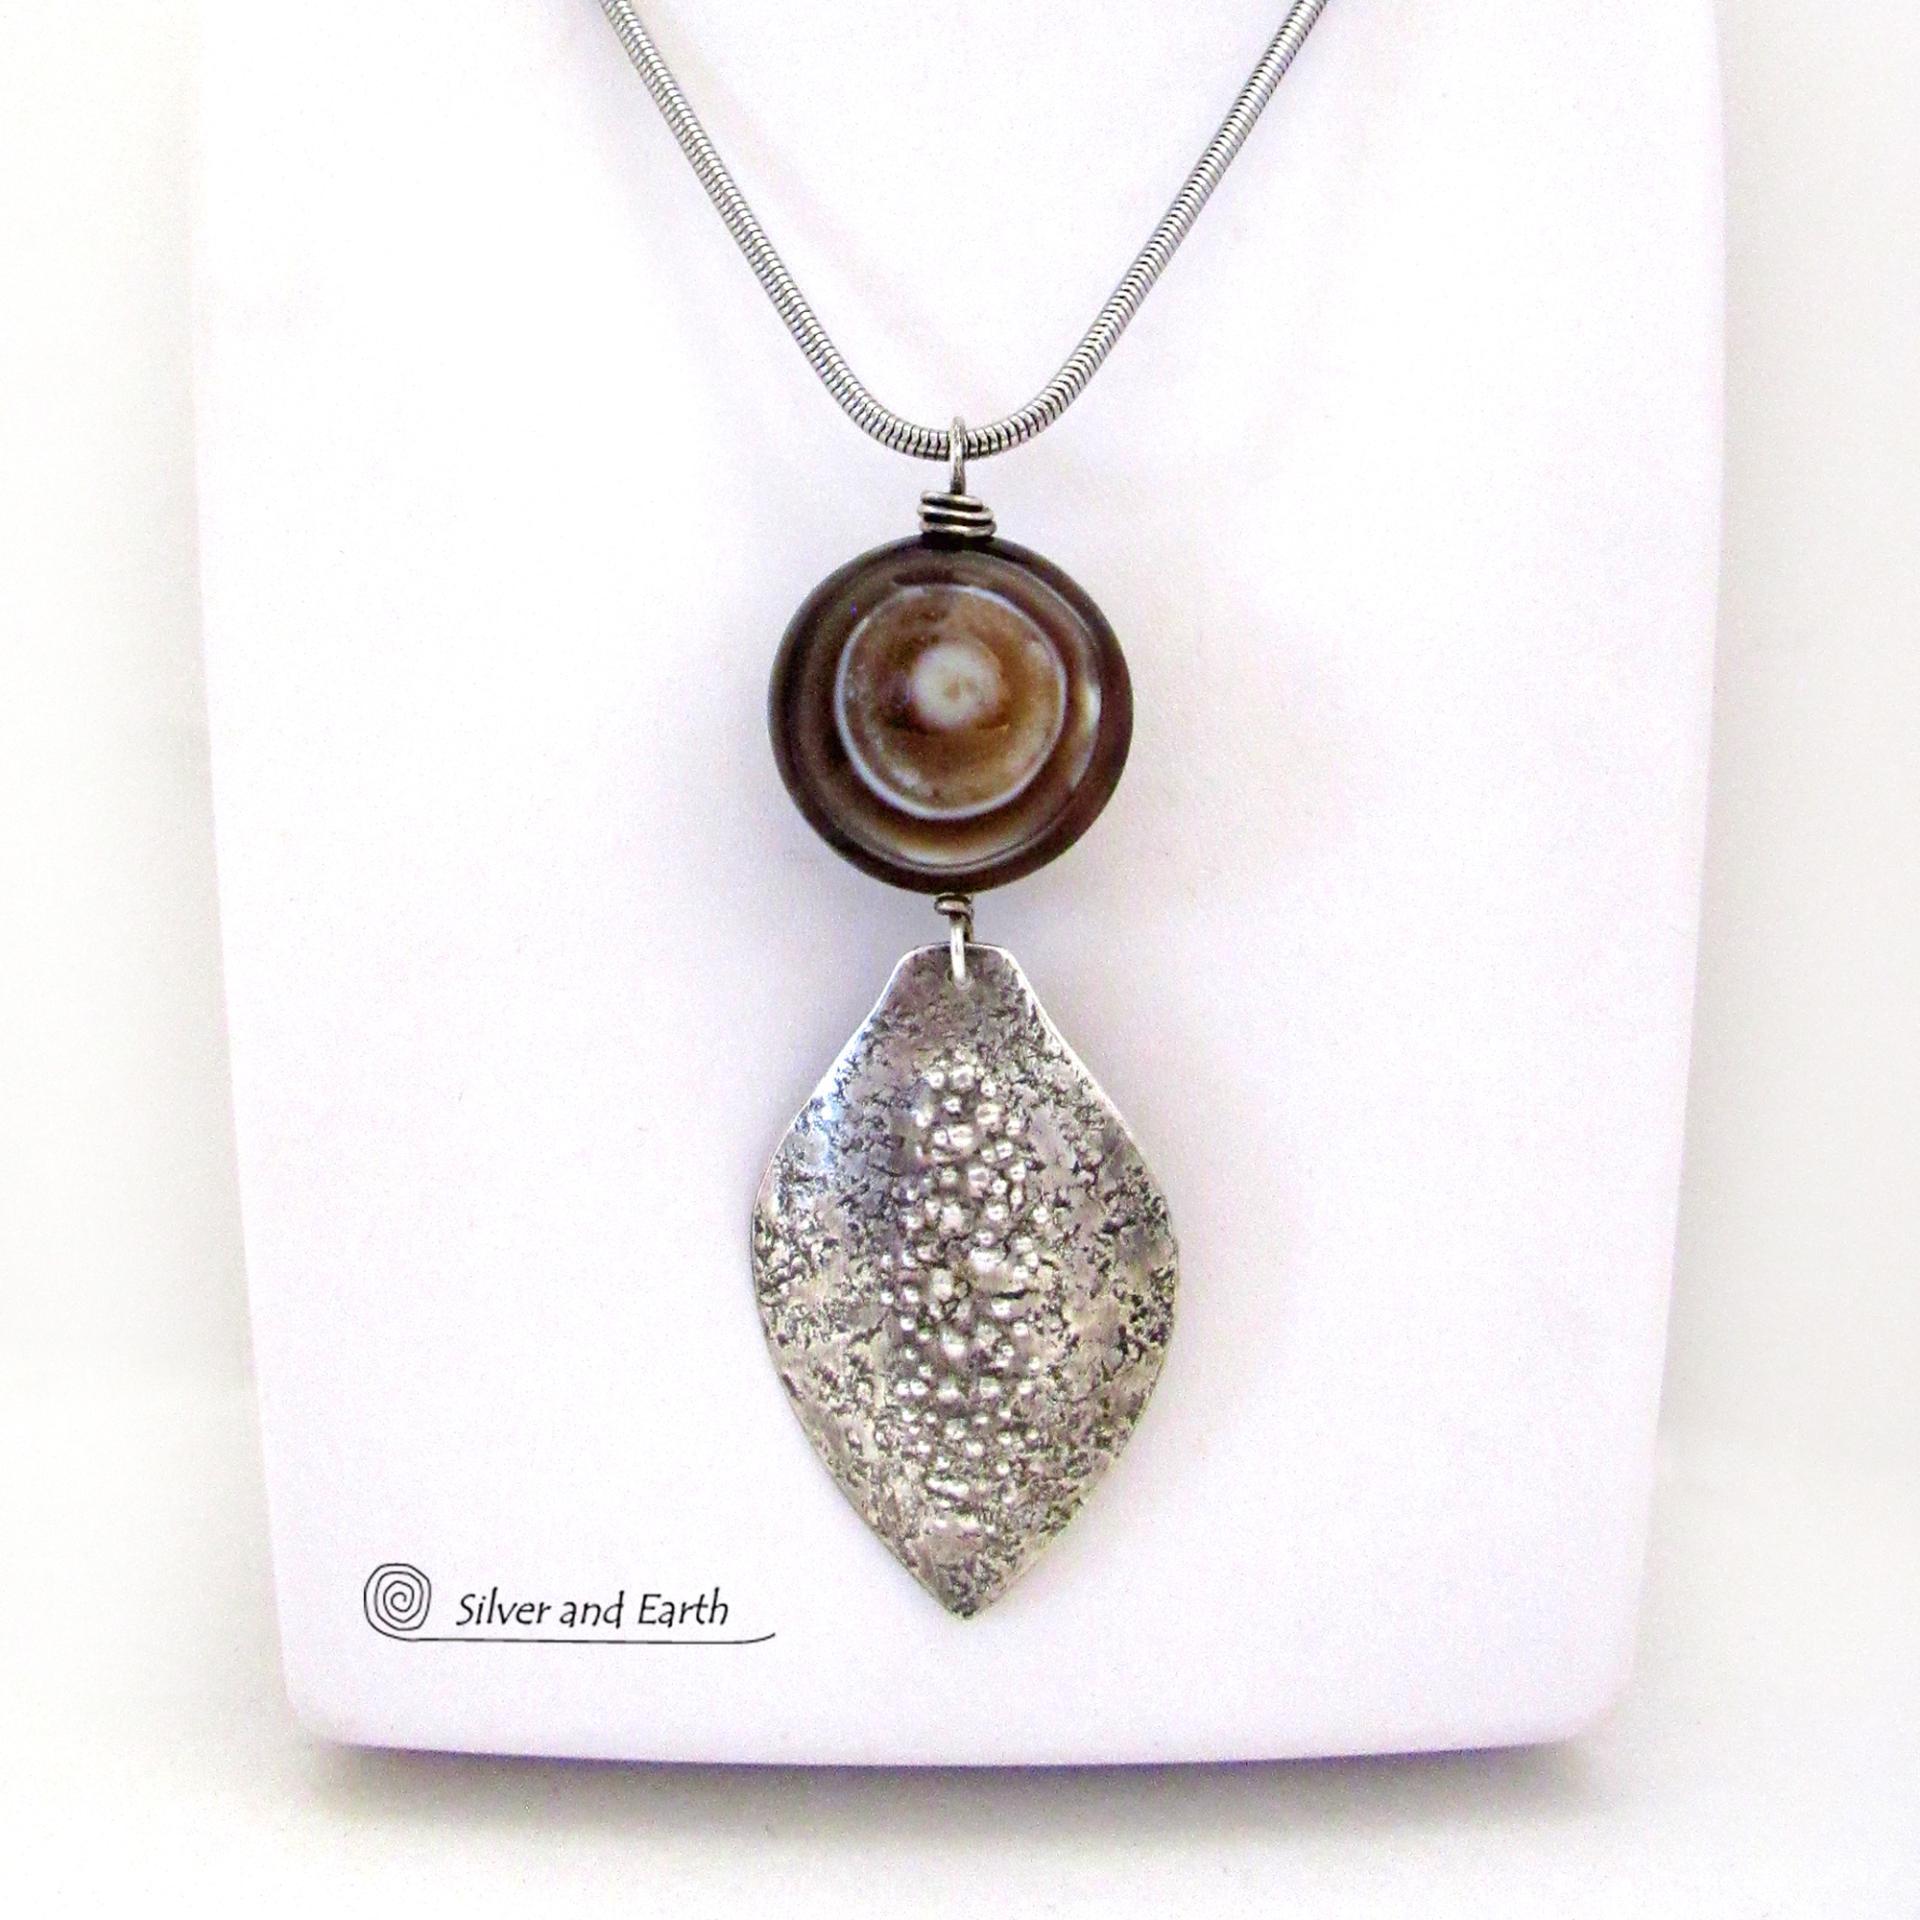 Sterling Silver Necklace with Black Banded Eye Agate Gemstone - Unique Earthy Natural Stone Jewelry